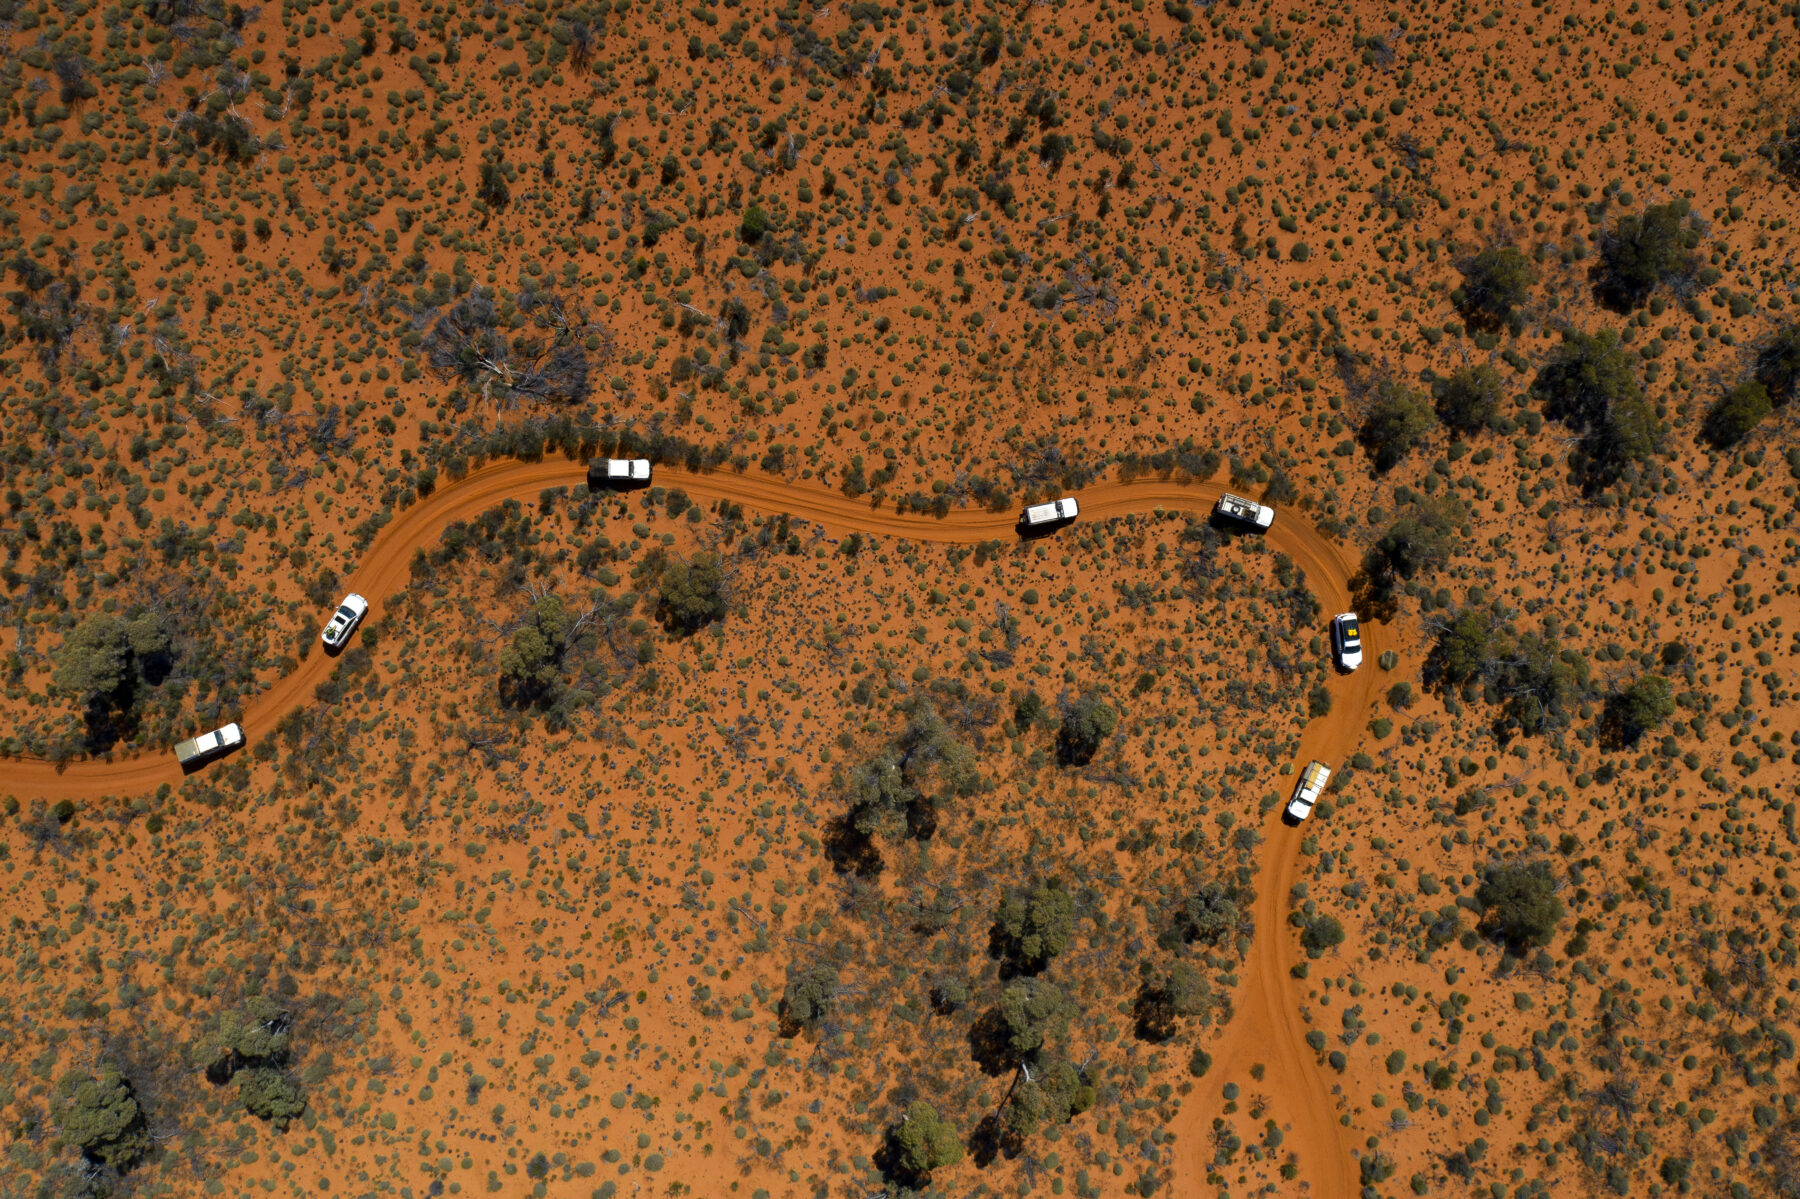 An aerial shot of a road with white cars driving on red dirt with scattered trees and shrubs.